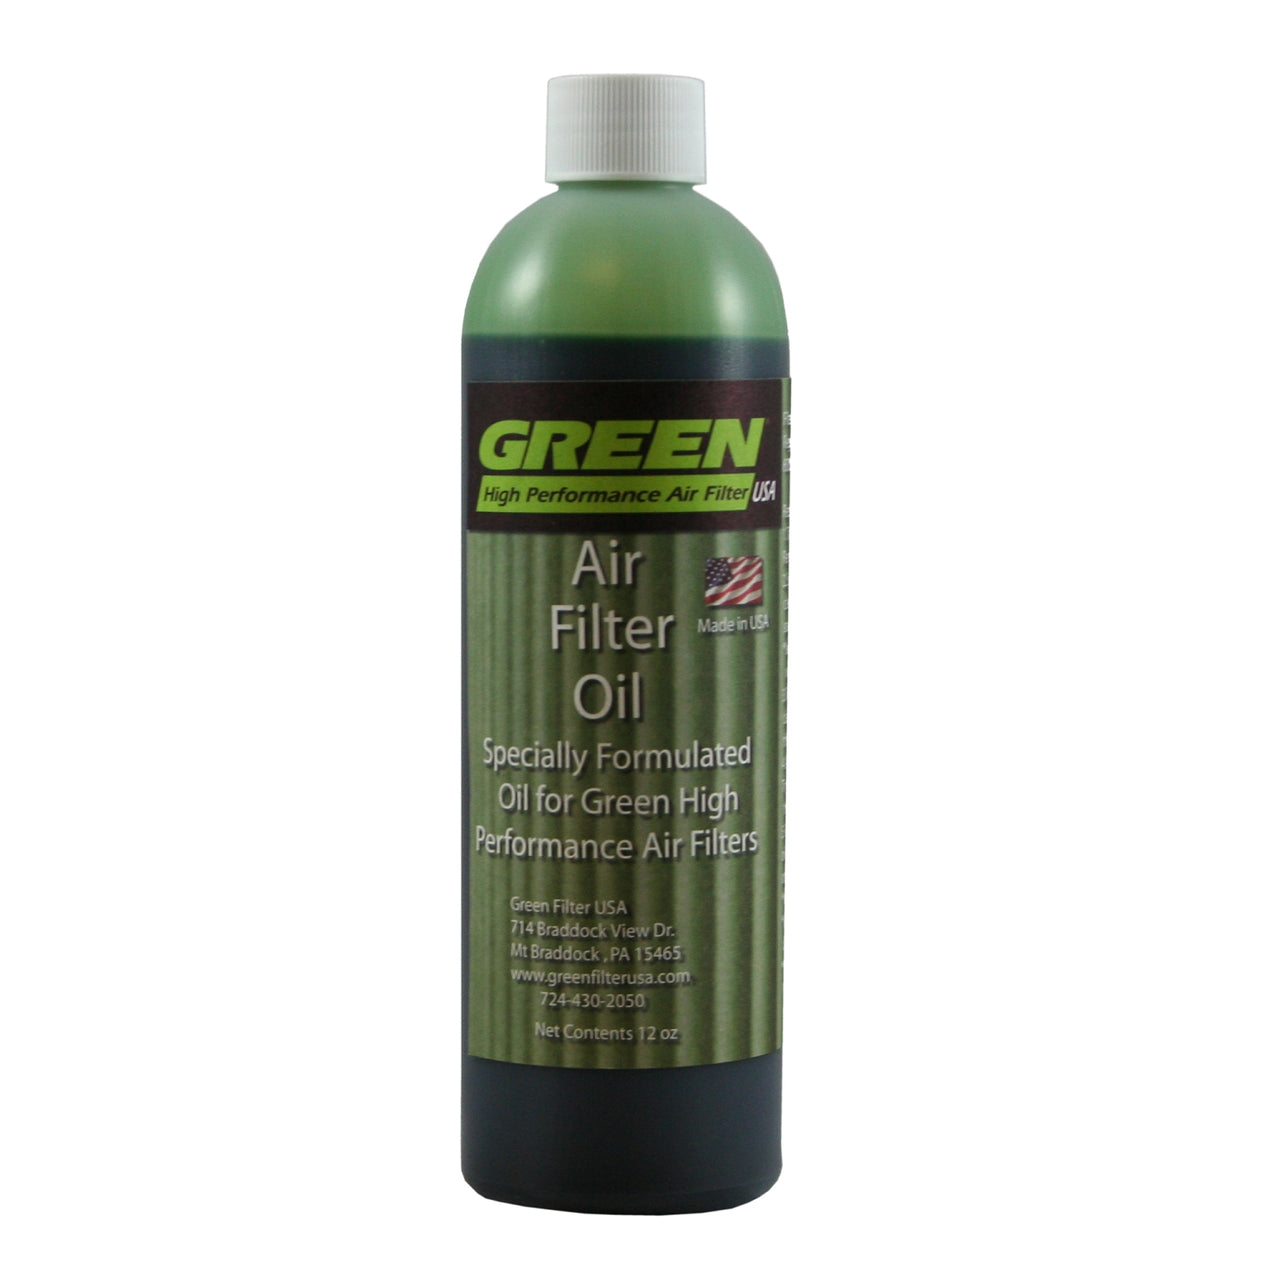 Green Filter Air Filter Synthetic Oil - 12oz.